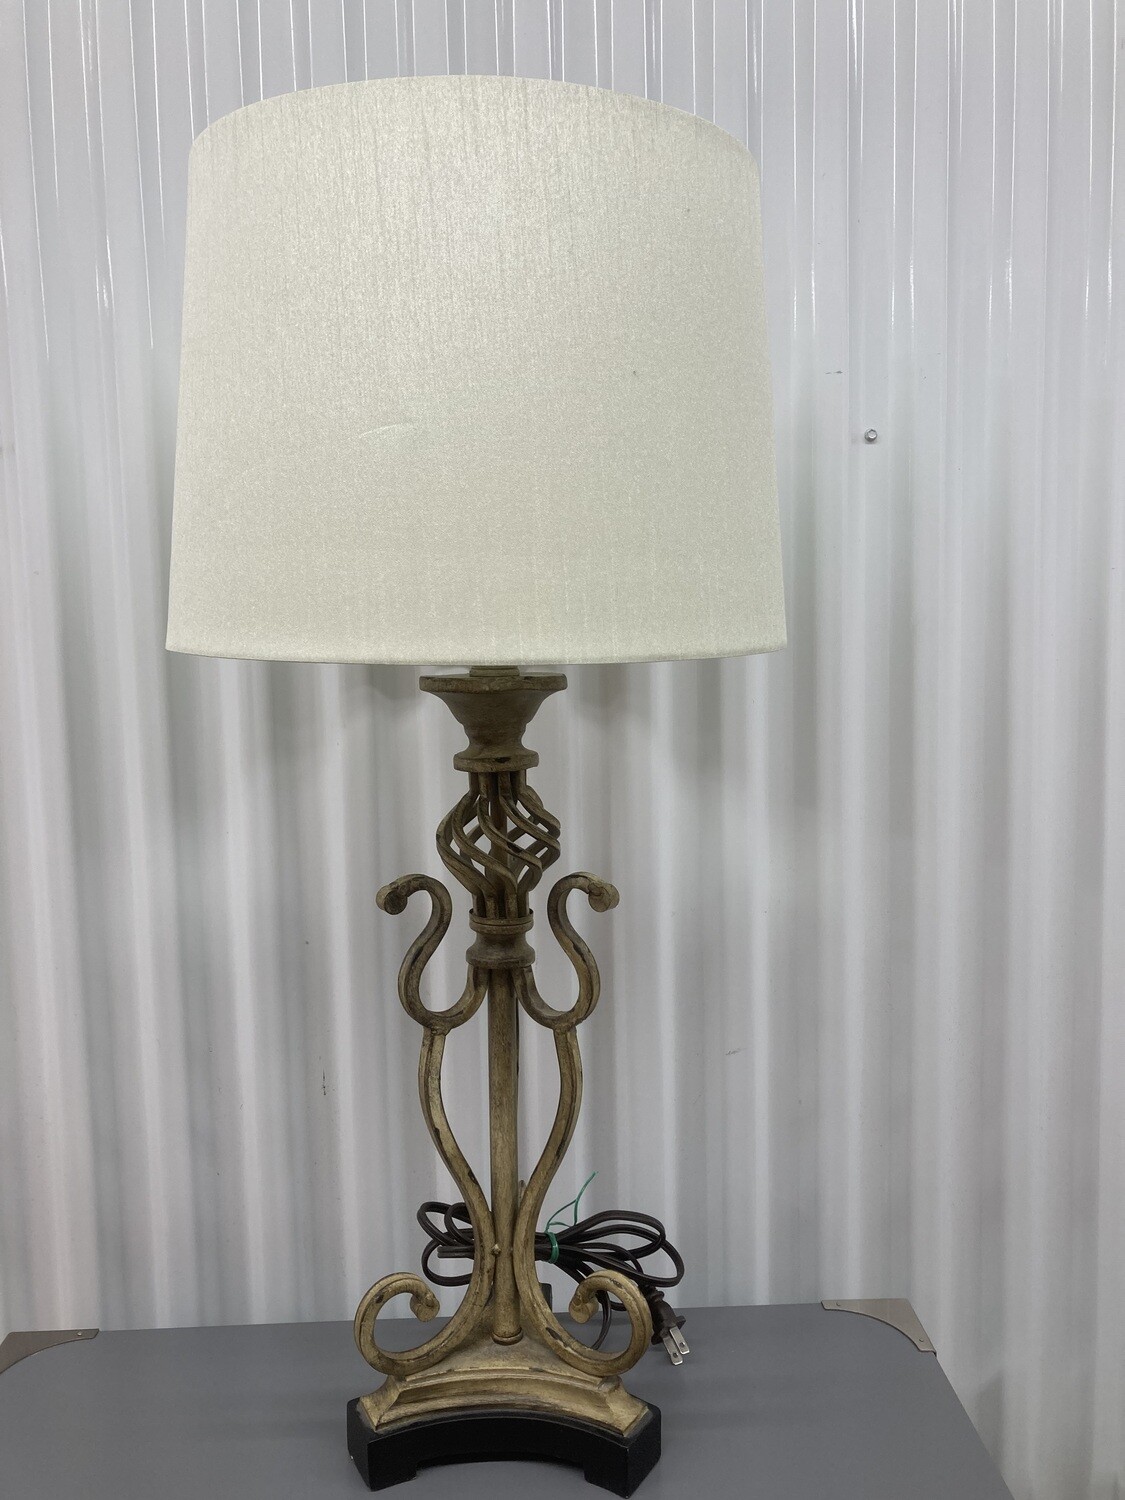 Table Lamp, metal triangular base #2103 ** 7 mos. to sell, 50% off + 30% sale